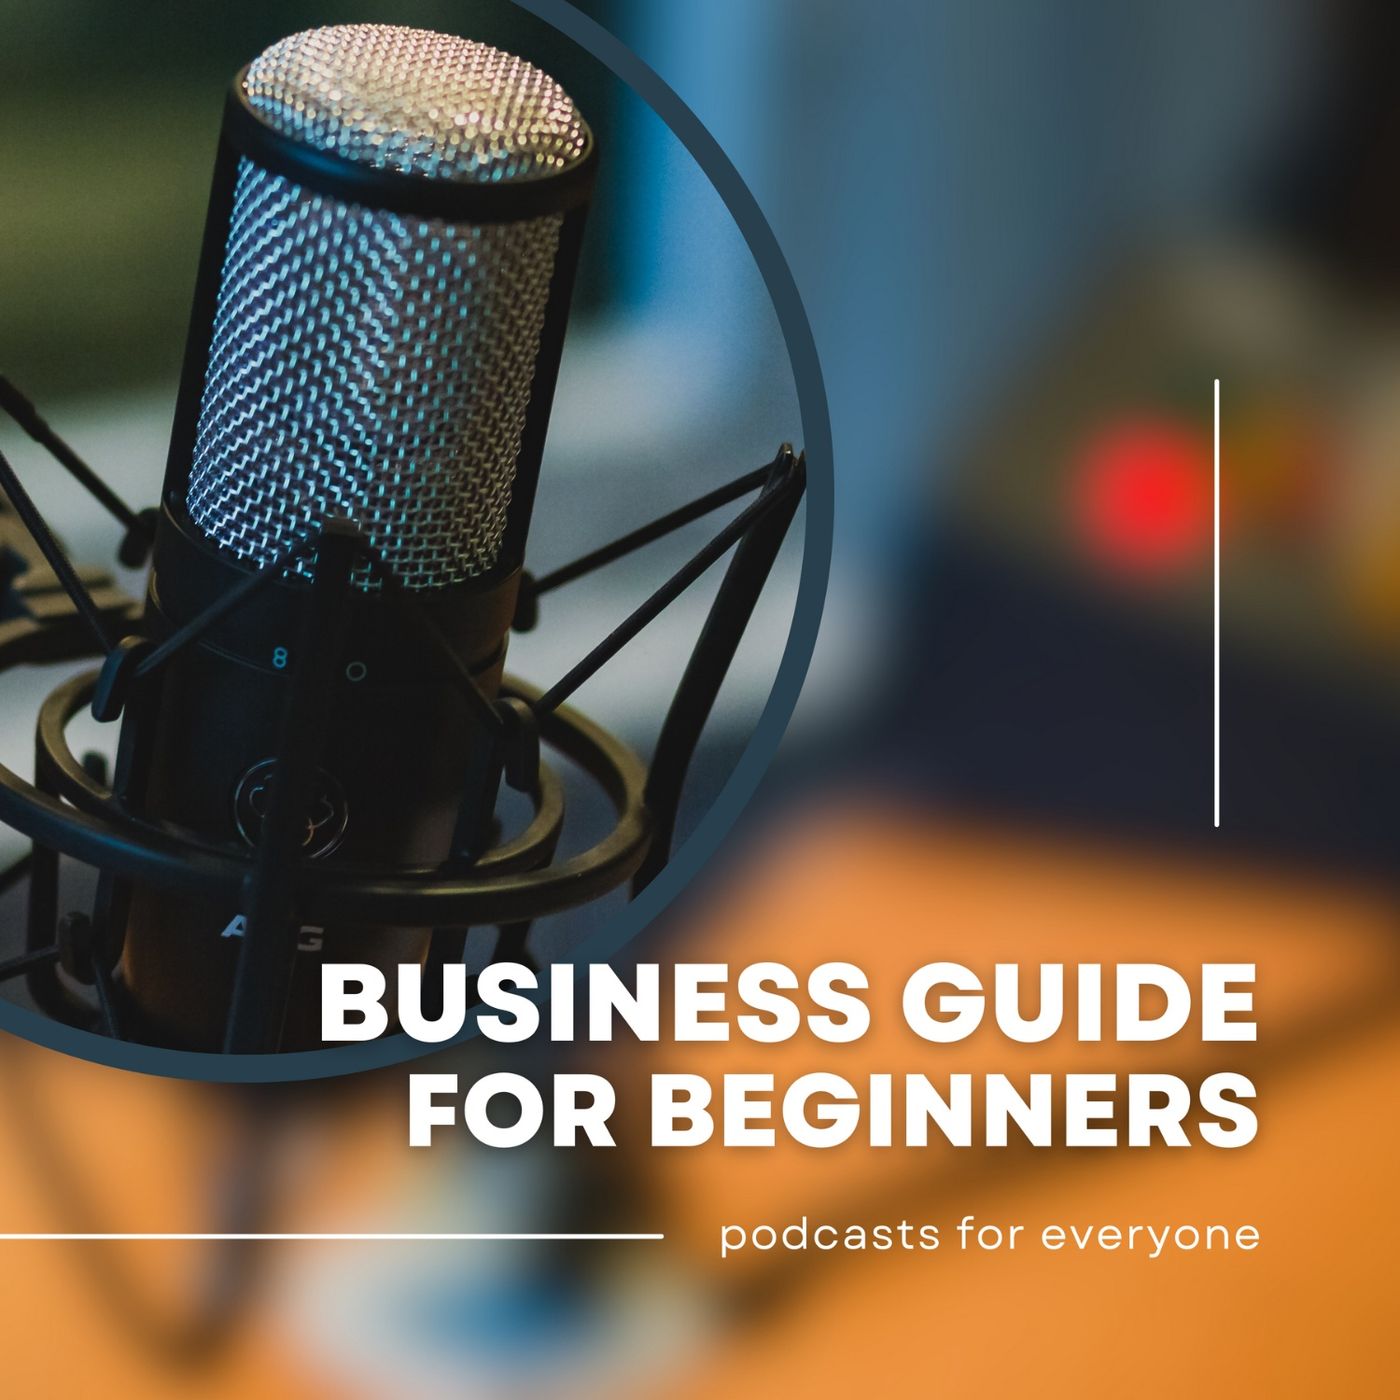 Business Guide For Beginners